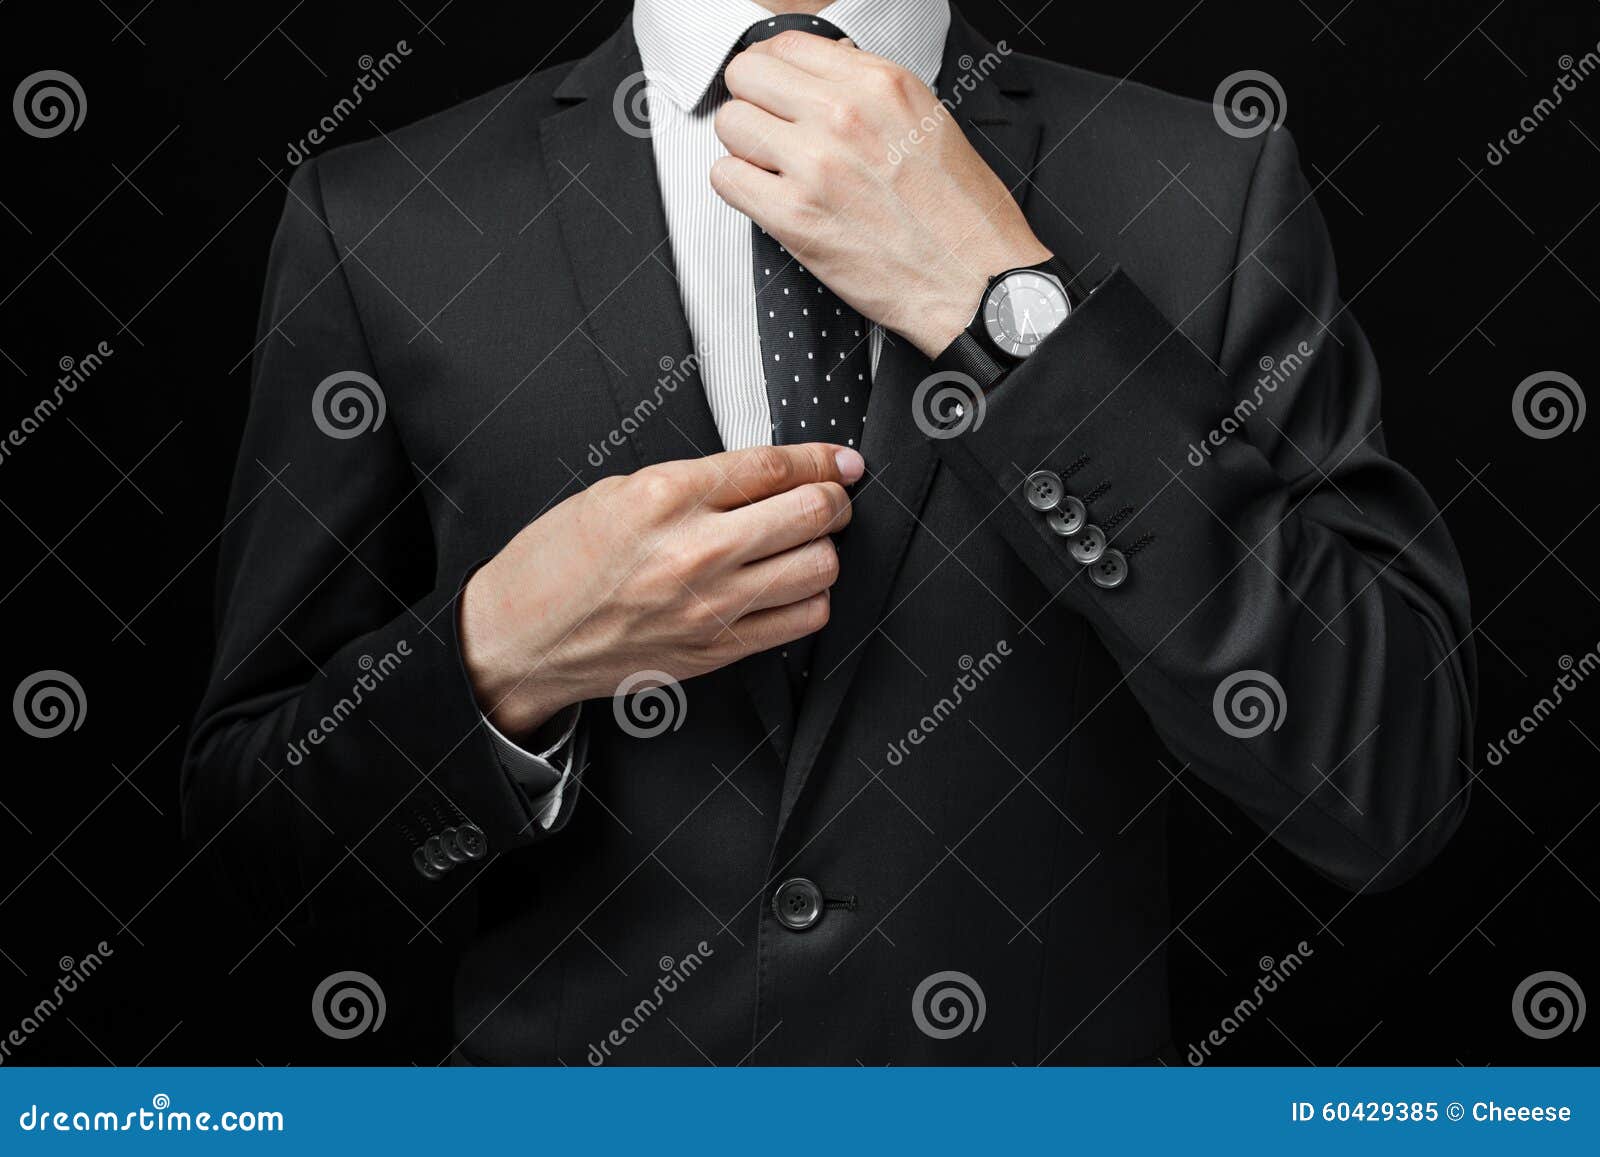 Man in Suit on a Black Background Stock Image - Image of happiness ...